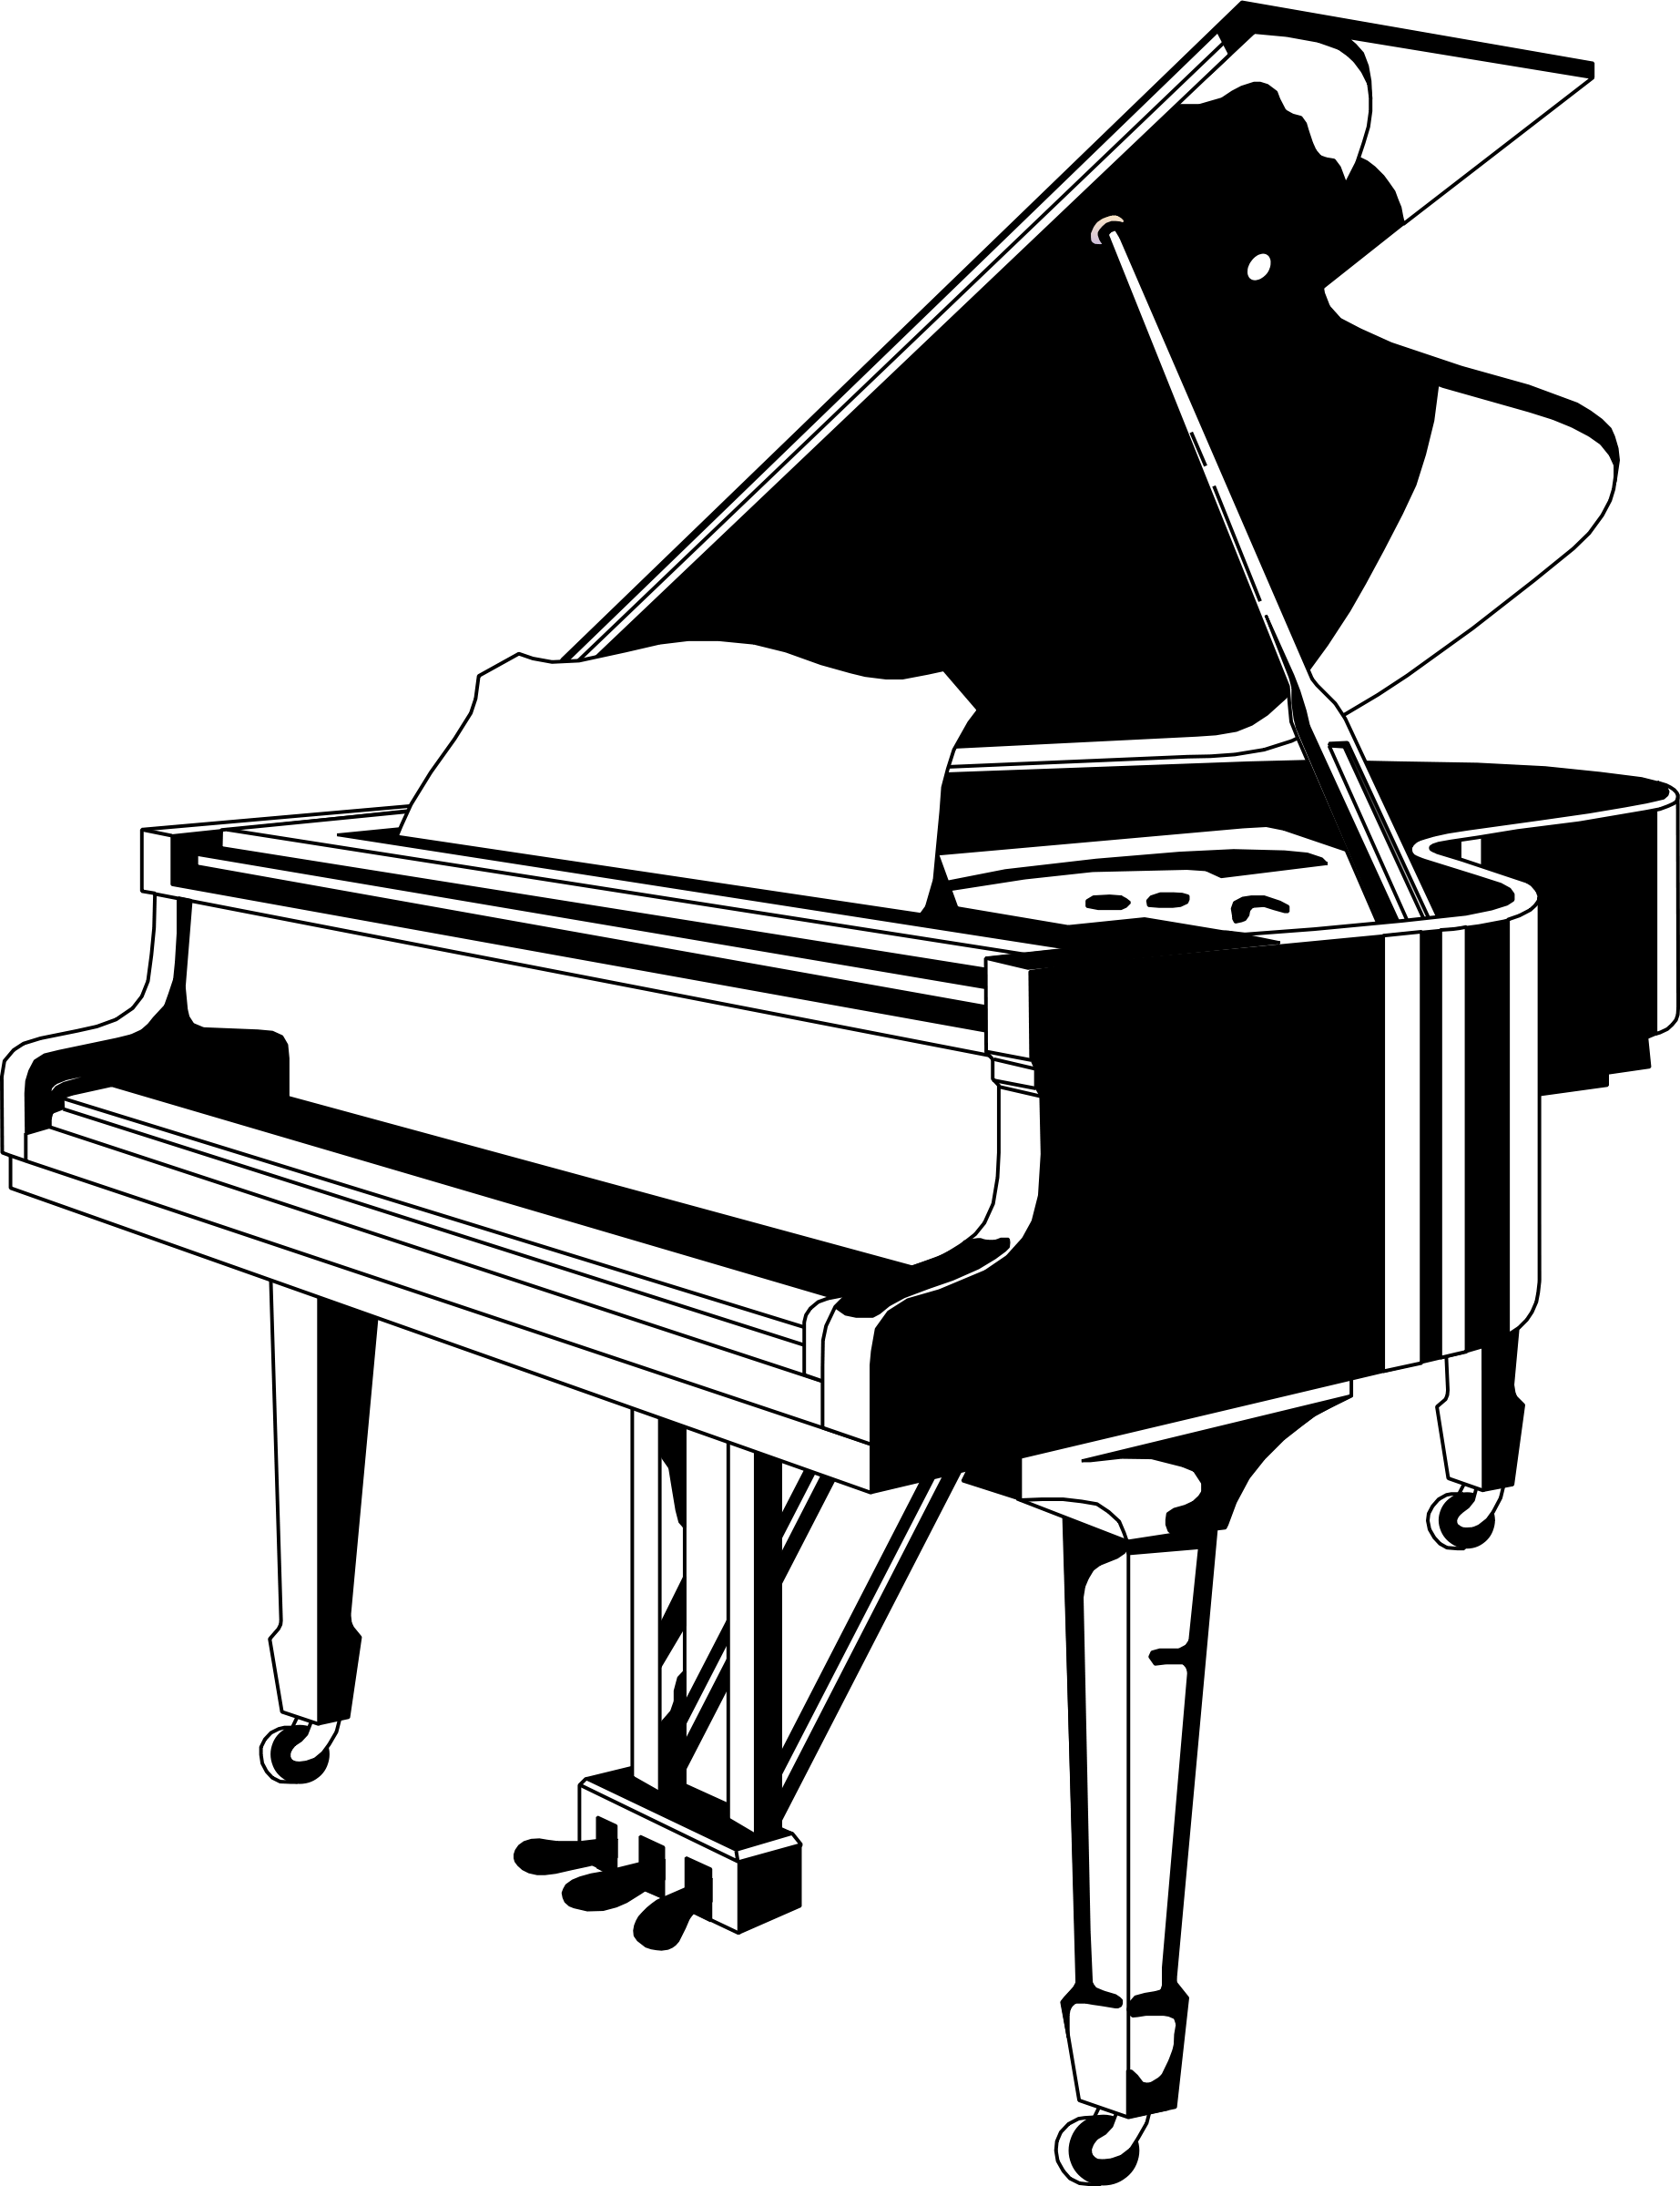 Clipart - piano black/white | Clipart library - Free Clipart Images